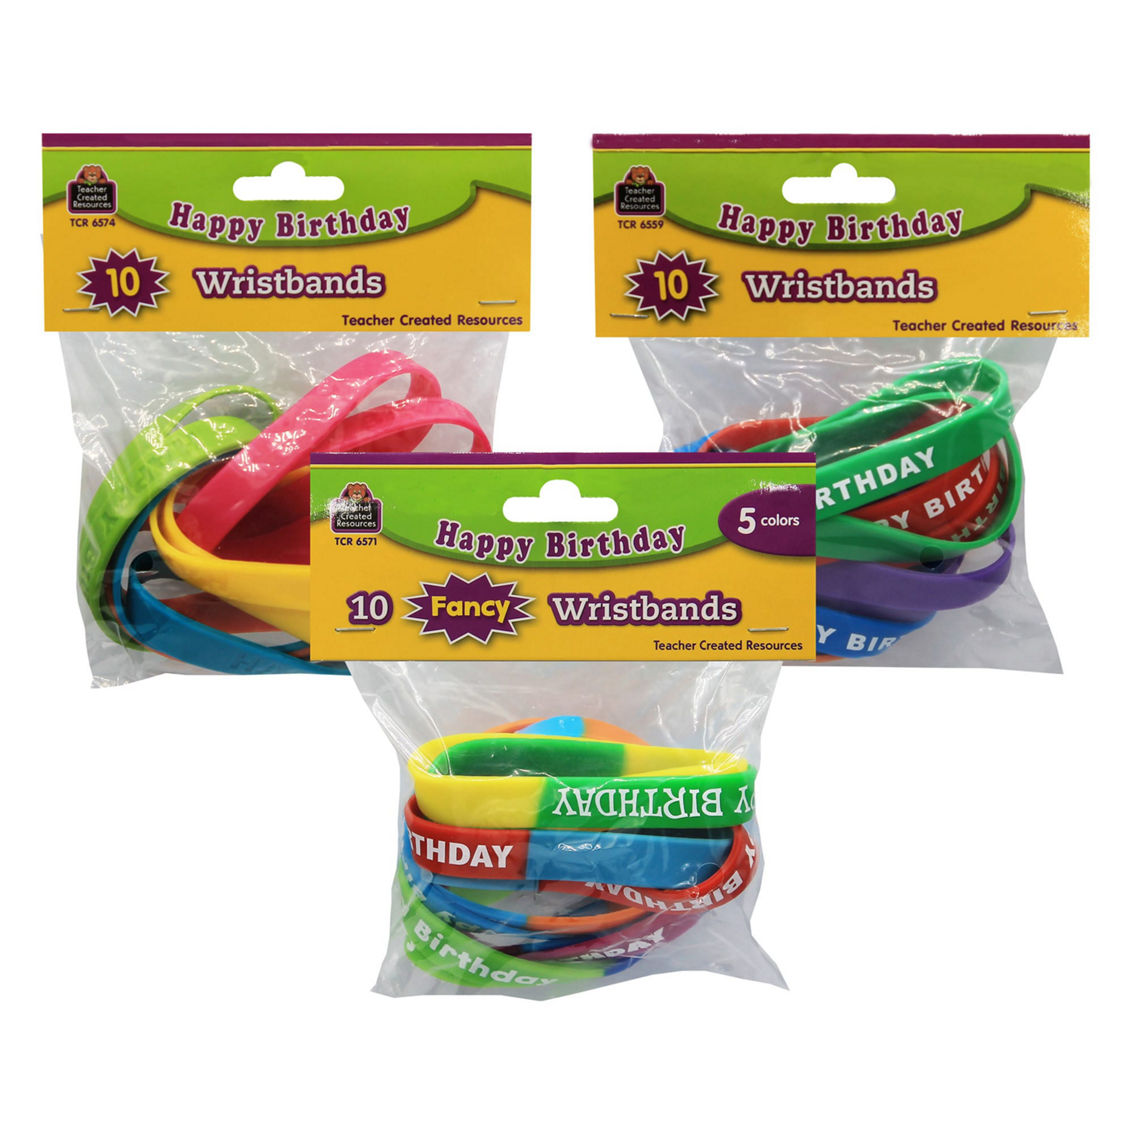 Teacher Created Resources® Happy Birthday Wristband Classroom Super Pack - Image 3 of 5